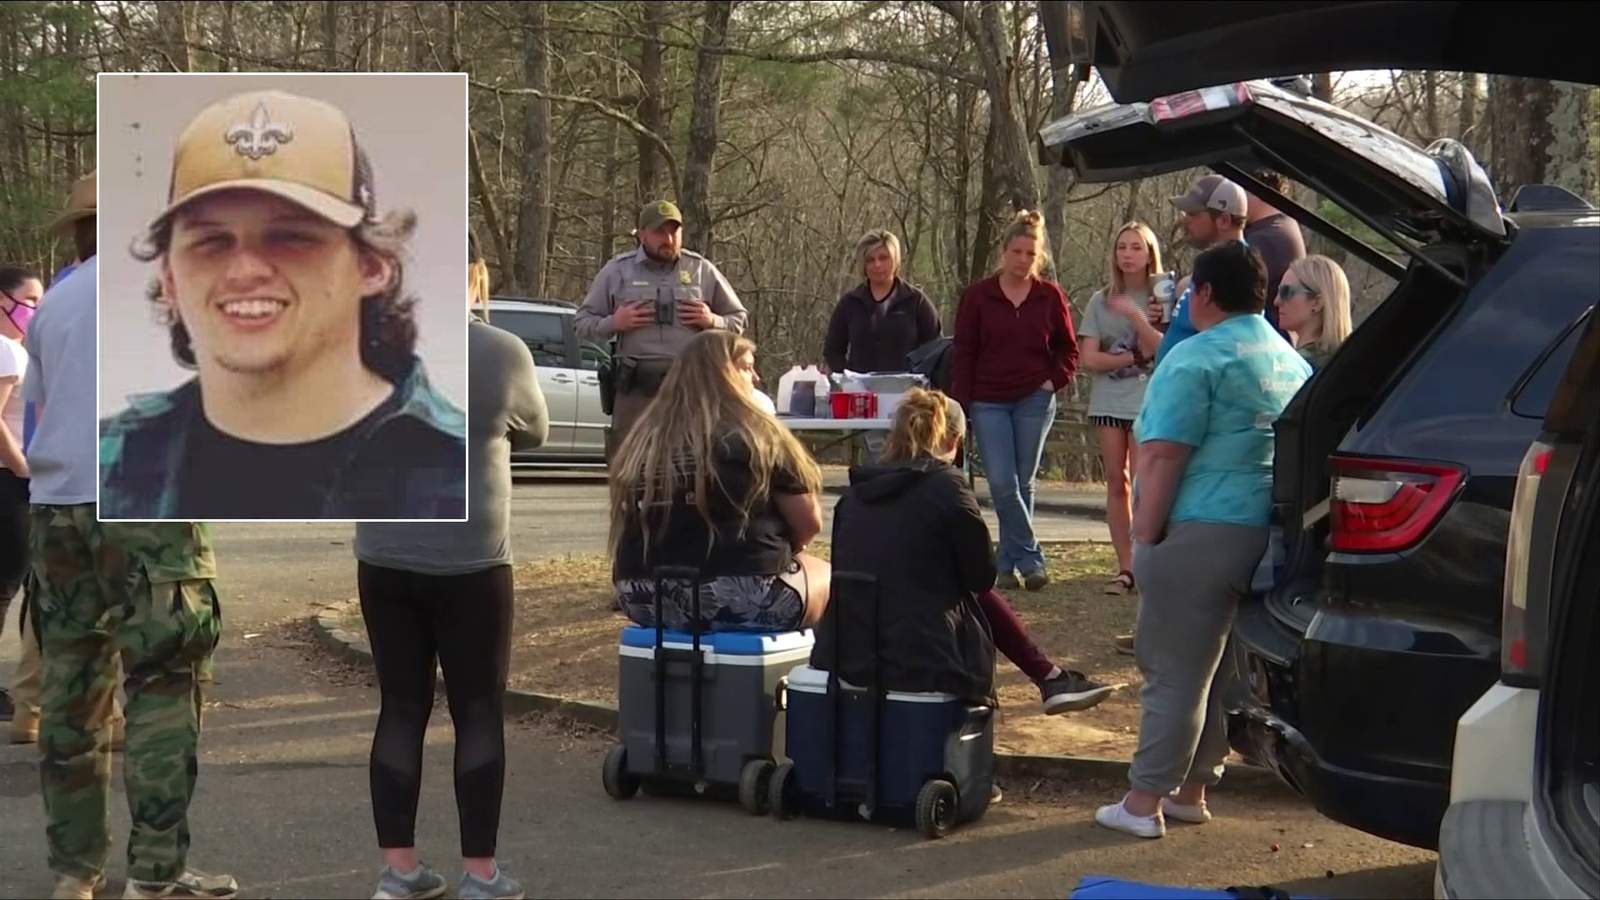 ‘Tons of red flags popping up’ as family remains hopeful for missing Bedford County man